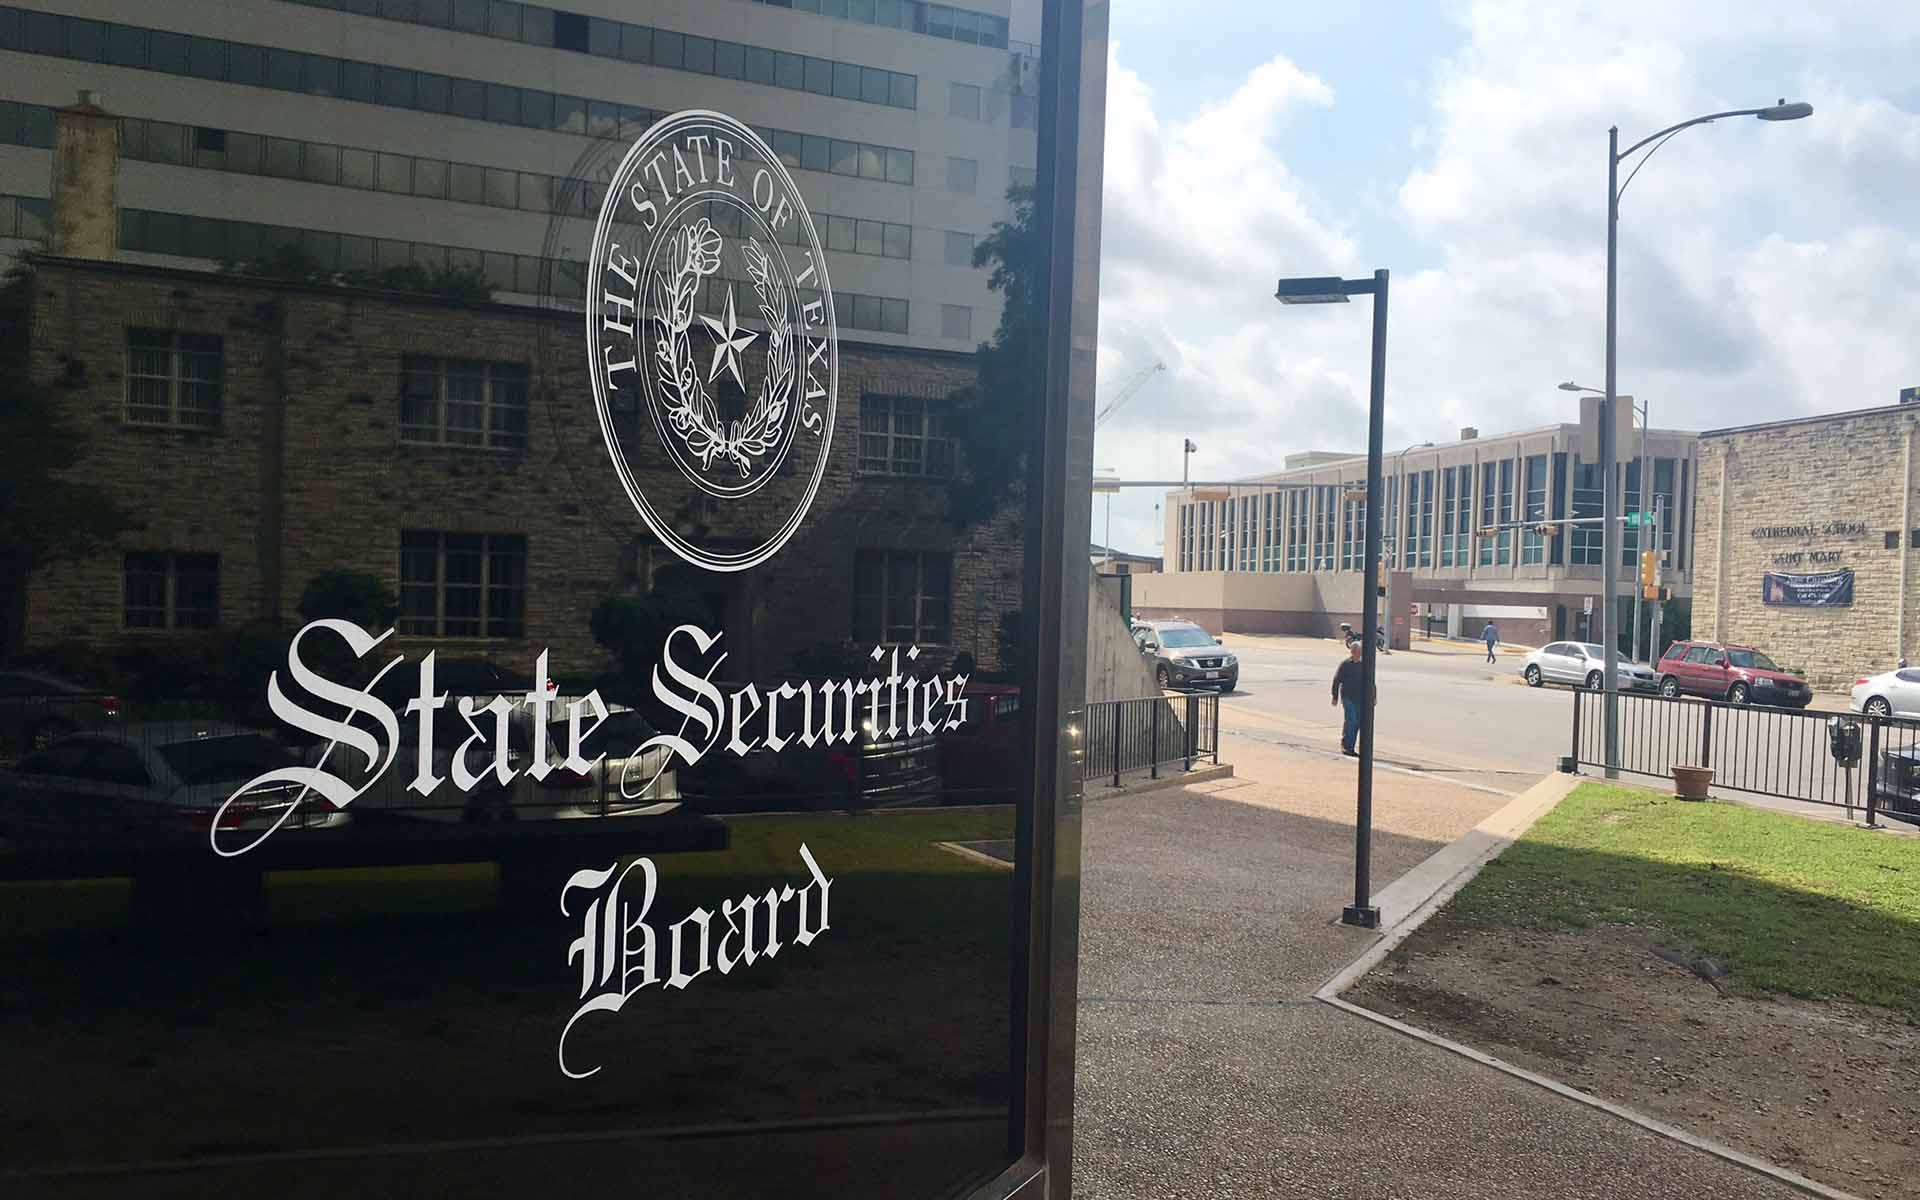 The Texas State Securities Board: Bitcoin Police?